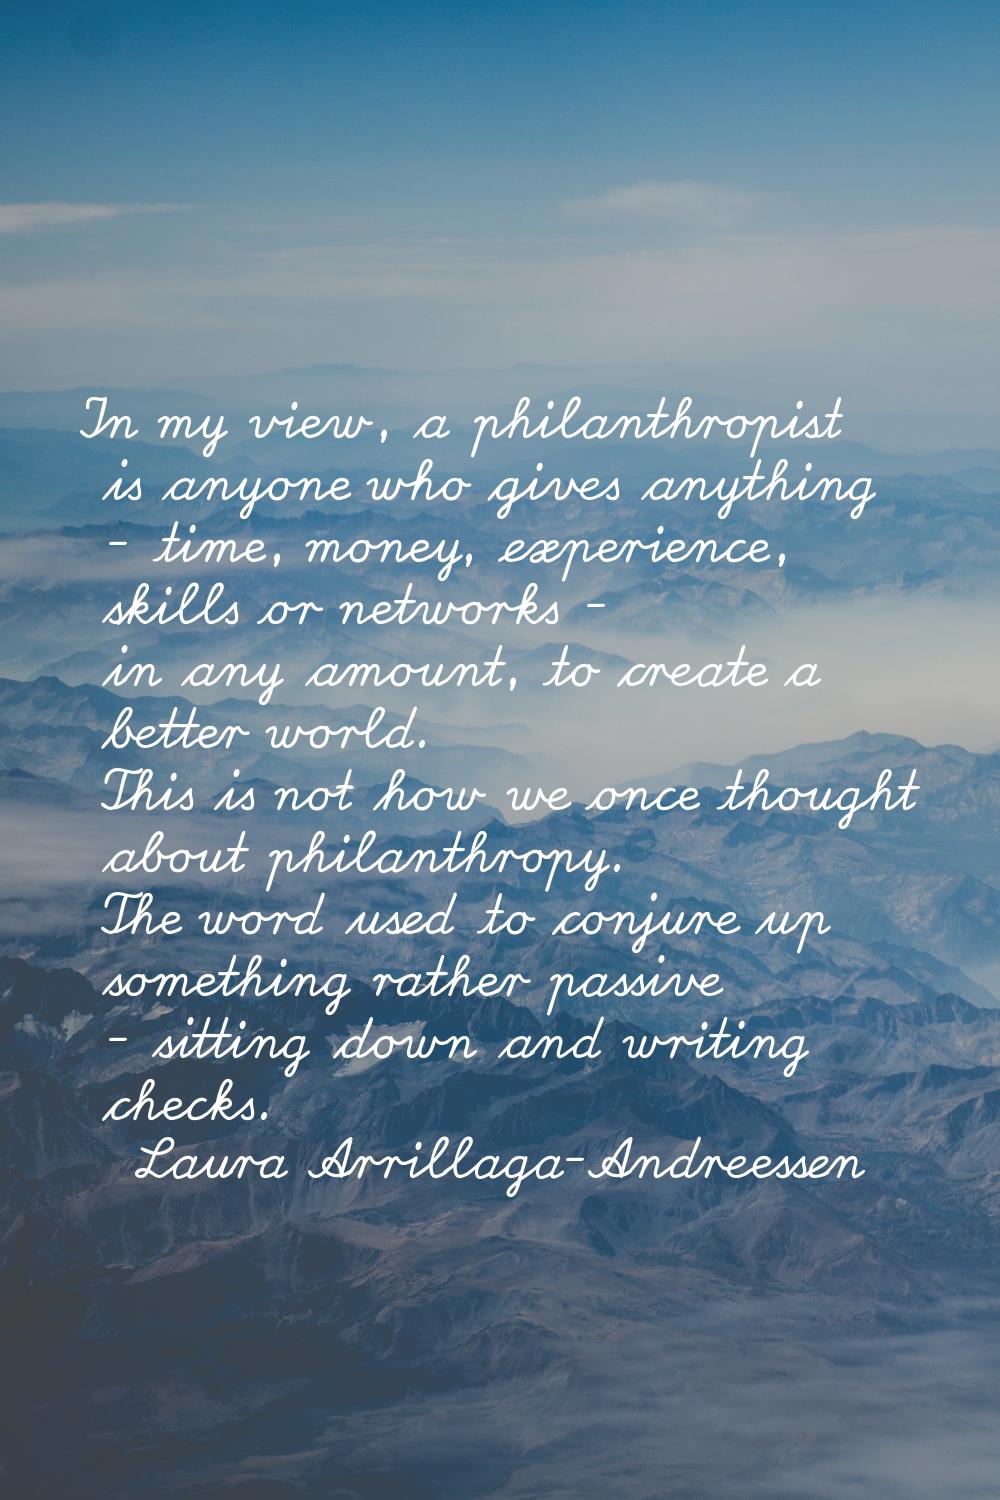 In my view, a philanthropist is anyone who gives anything - time, money, experience, skills or netw